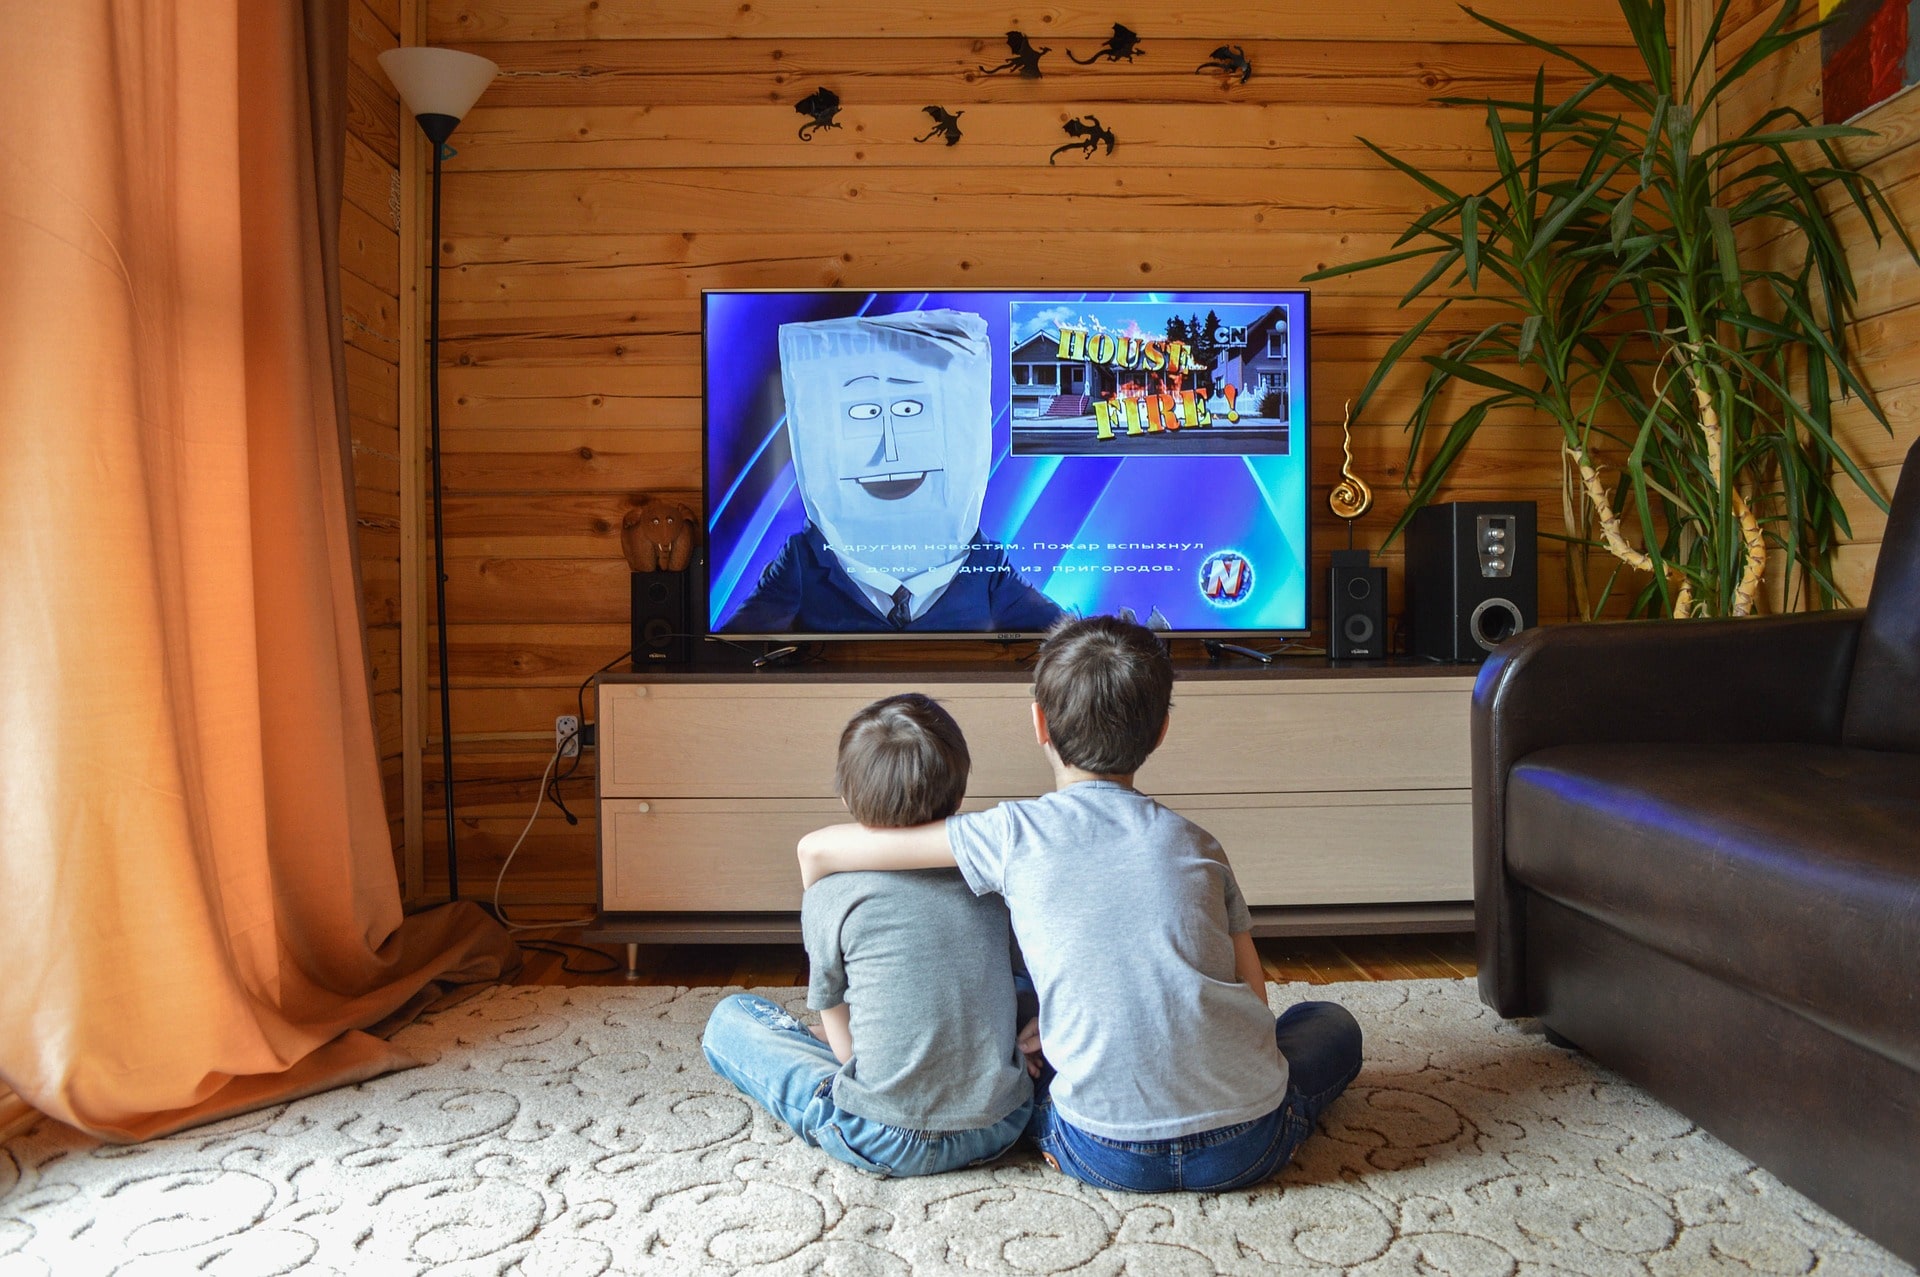 Two brothers watching television together.